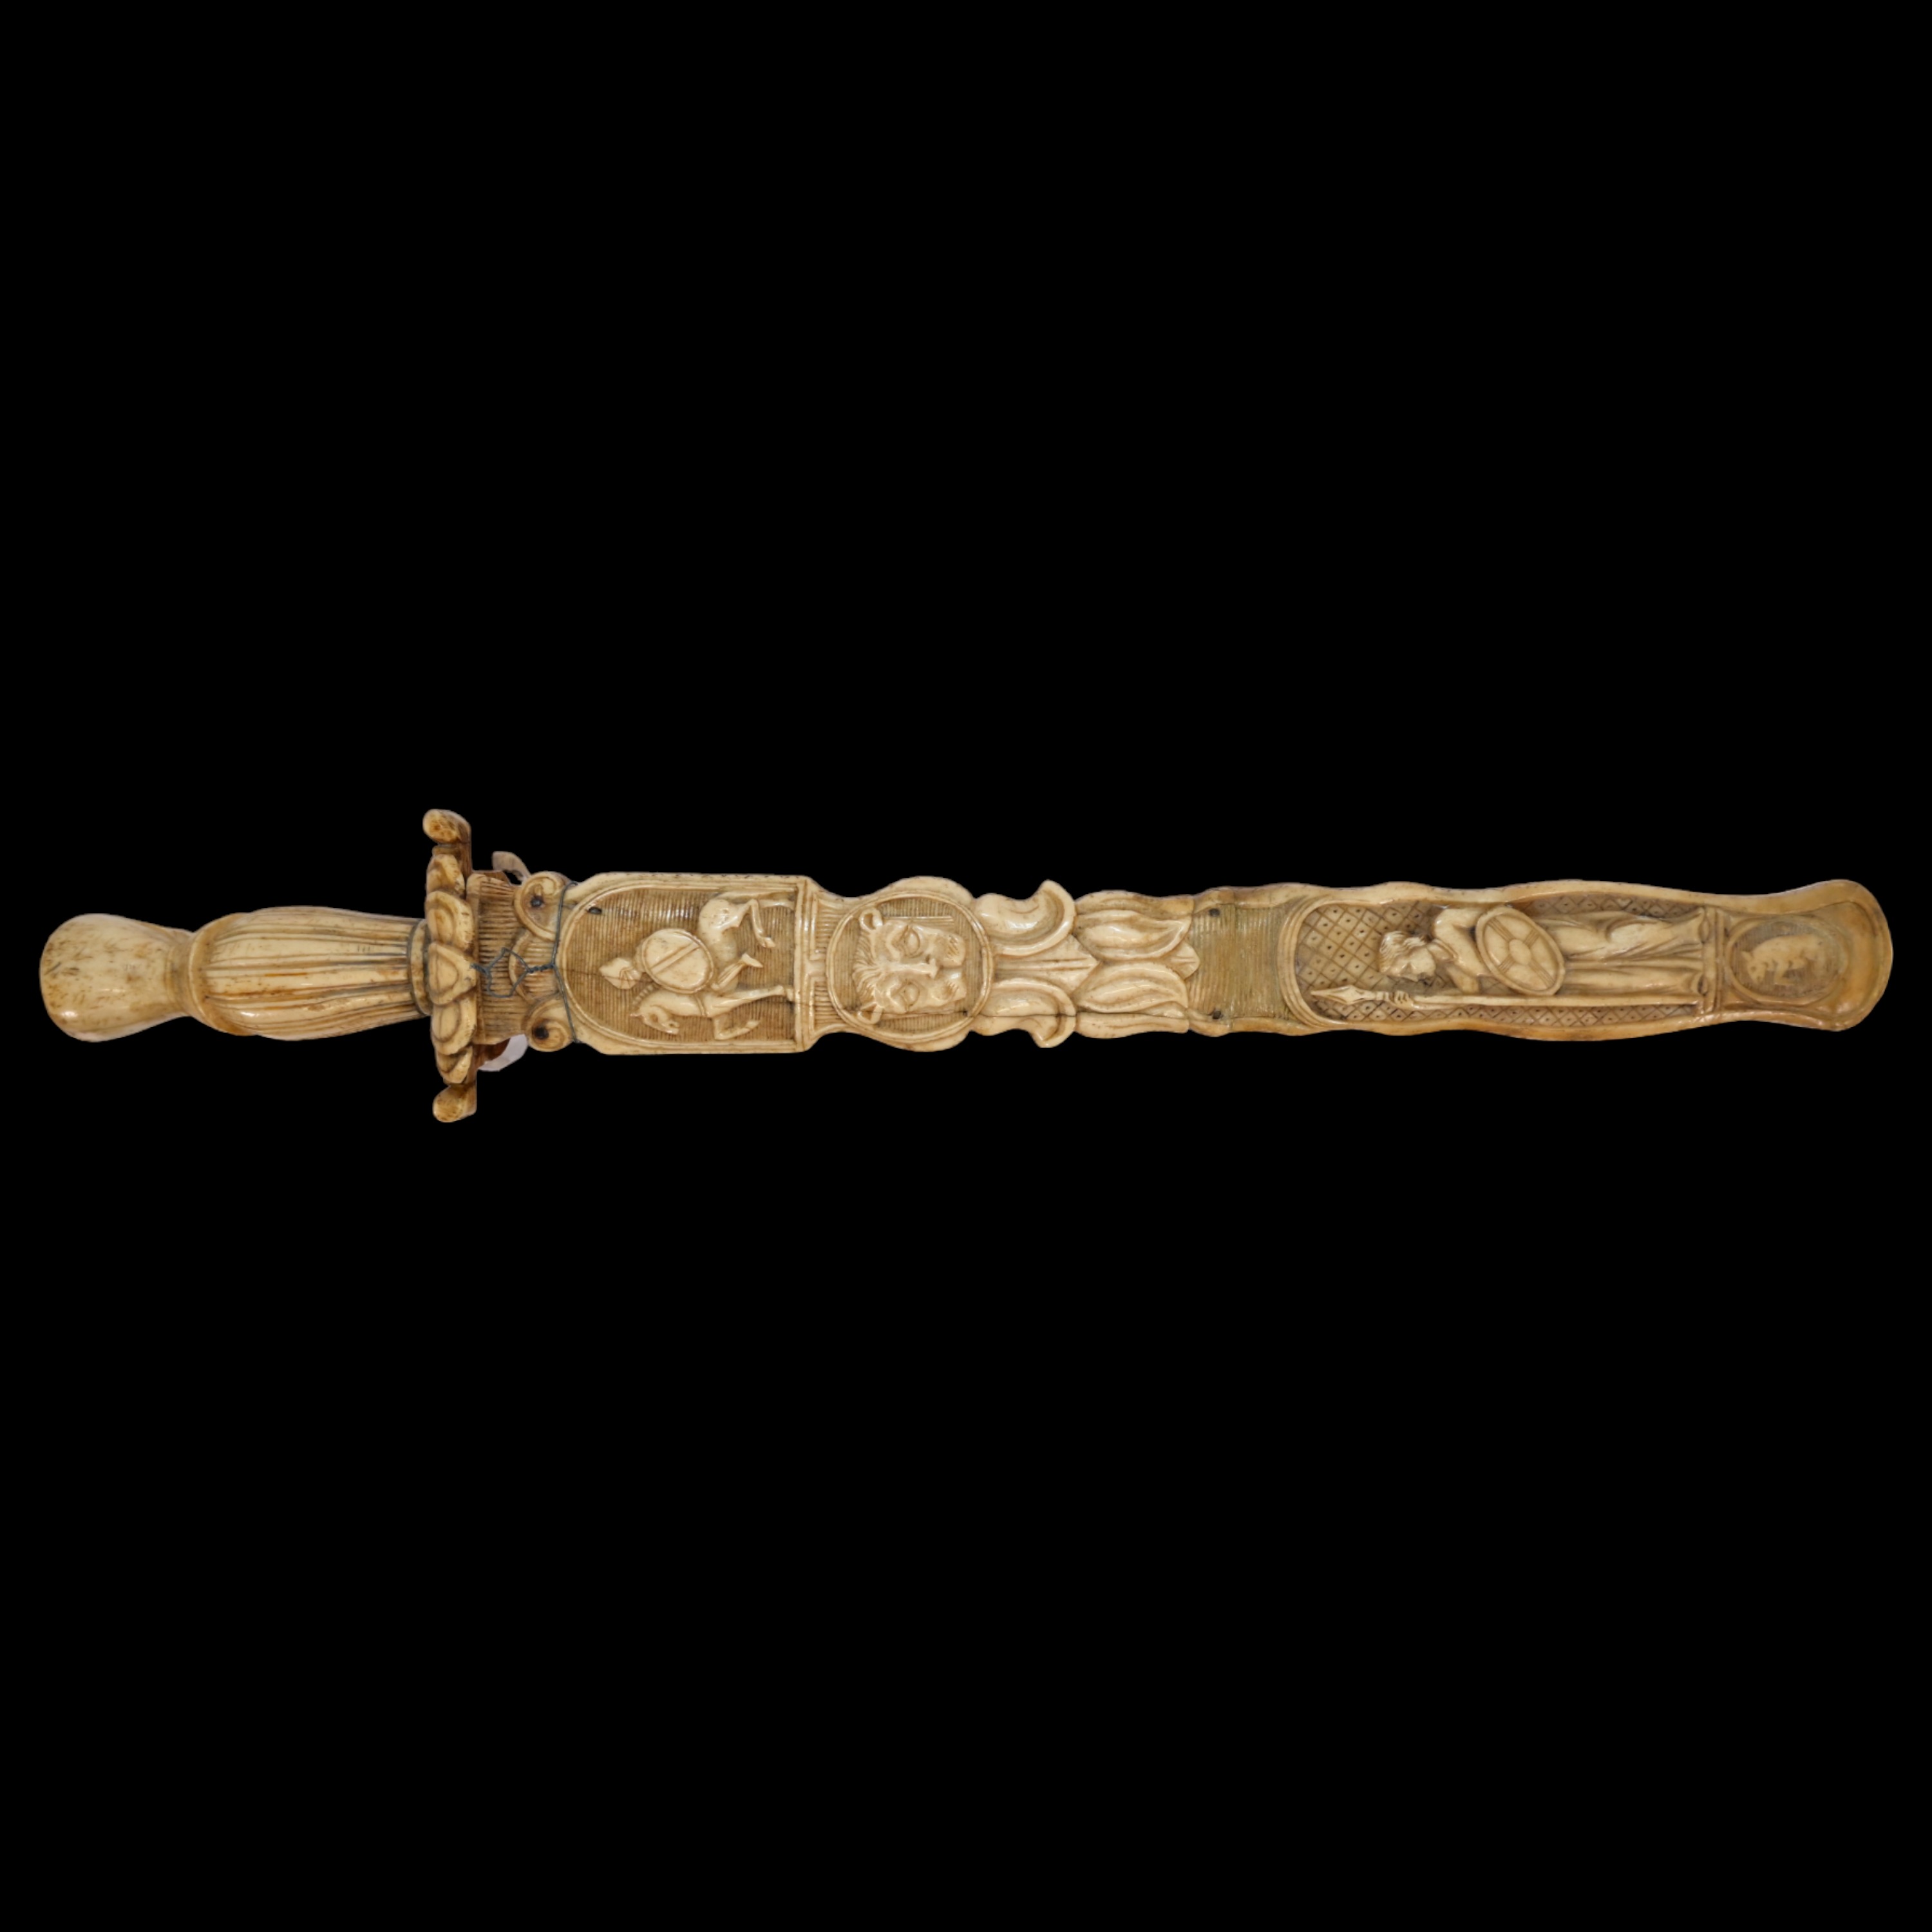 A Rare French nobleman's hunting dagger, hilt and scabbard carved from bone, 19th century. - Image 3 of 13